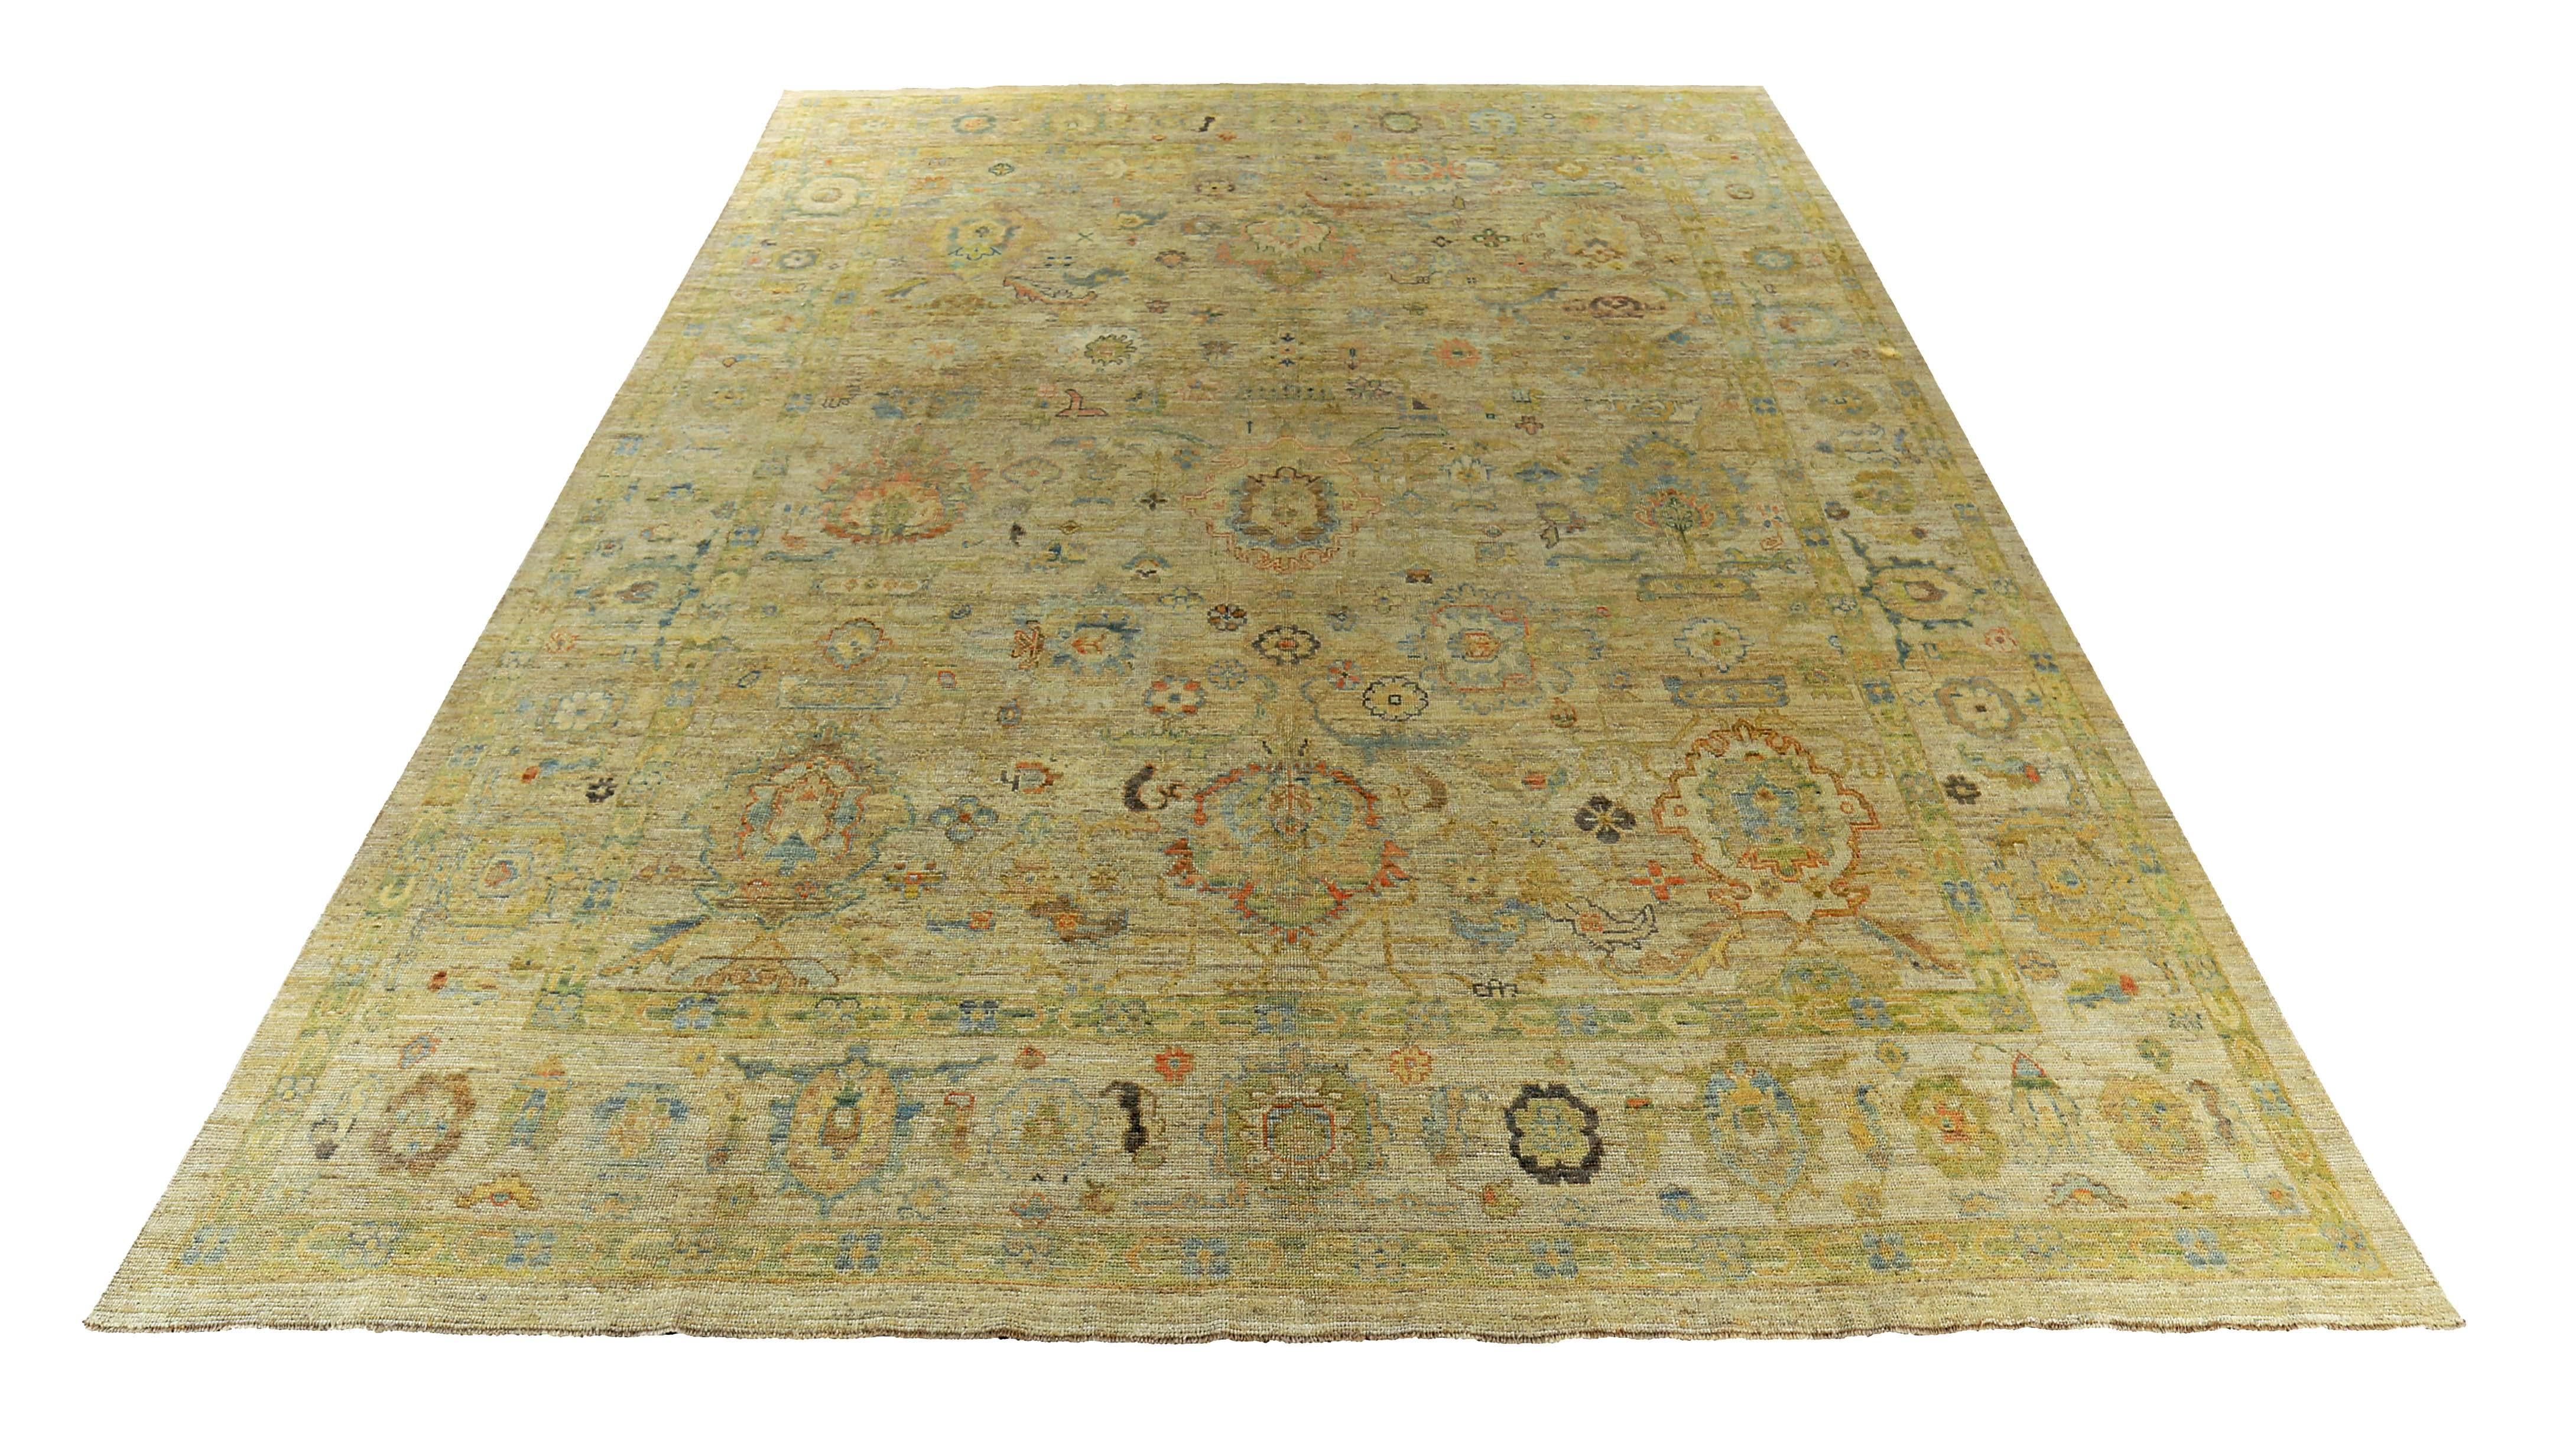 New Turkish rug made of handwoven sheep’s wool of the finest quality. It’s colored with organic vegetable dyes that are certified safe for humans and pets alike. It features green and gold floral details on a lovely ivory field. Flower patterns are